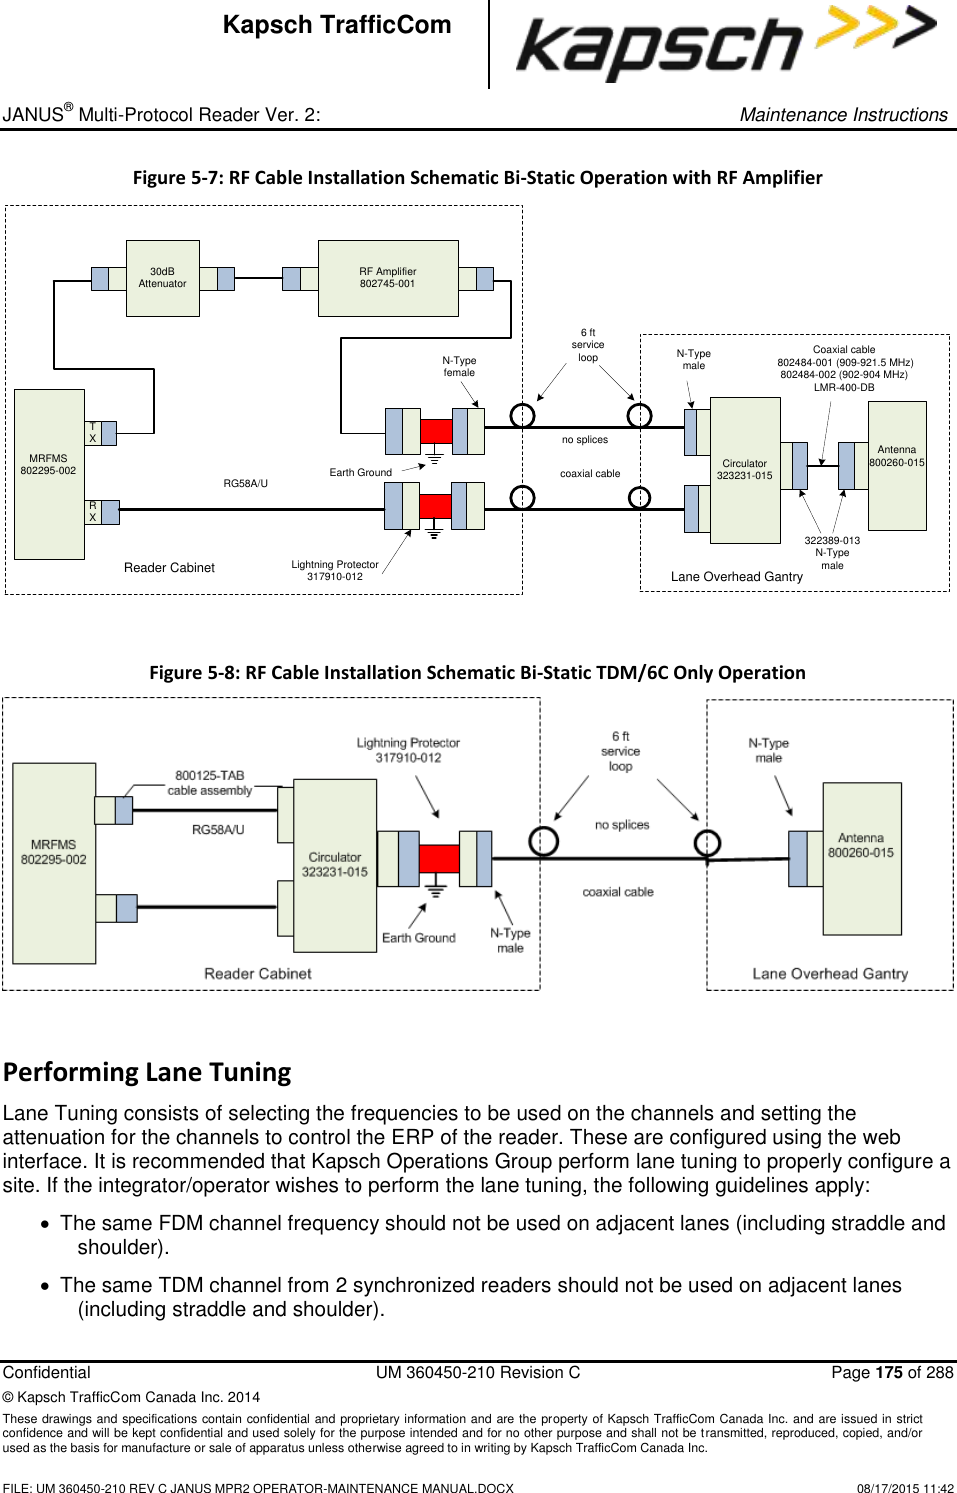 _ JANUS® Multi-Protocol Reader Ver. 2:     Maintenance Instructions  Confidential  UM 360450-210 Revision C  Page 175 of 288 © Kapsch TrafficCom Canada Inc. 2014 These drawings and specifications contain confidential and proprietary information and are the property of Kapsch TrafficCom Canada Inc. and are issued in strict confidence and will be kept confidential and used solely for the purpose intended and for no other purpose and shall not be transmitted, reproduced, copied, and/or used as the basis for manufacture or sale of apparatus unless otherwise agreed to in writing by Kapsch TrafficCom Canada Inc.    FILE: UM 360450-210 REV C JANUS MPR2 OPERATOR-MAINTENANCE MANUAL.DOCX   08/17/2015 11:42 Kapsch TrafficCom Figure 5-7: RF Cable Installation Schematic Bi-Static Operation with RF Amplifier RG58A/UMRFMS802295-002N-TypemaleAntenna800260-015TXReader Cabinet Lane Overhead GantryEarth GroundRX6 ft service loopcoaxial cableno splicesN-TypefemaleCirculator323231-015Coaxial cable 802484-001 (909-921.5 MHz)802484-002 (902-904 MHz)LMR-400-DB322389-013N-TypemaleLightning Protector317910-01230dBAttenuator RF Amplifier802745-001  Figure 5-8: RF Cable Installation Schematic Bi-Static TDM/6C Only Operation Performing Lane Tuning Lane Tuning consists of selecting the frequencies to be used on the channels and setting the attenuation for the channels to control the ERP of the reader. These are configured using the web interface. It is recommended that Kapsch Operations Group perform lane tuning to properly configure a site. If the integrator/operator wishes to perform the lane tuning, the following guidelines apply:   The same FDM channel frequency should not be used on adjacent lanes (including straddle and shoulder).   The same TDM channel from 2 synchronized readers should not be used on adjacent lanes (including straddle and shoulder).  